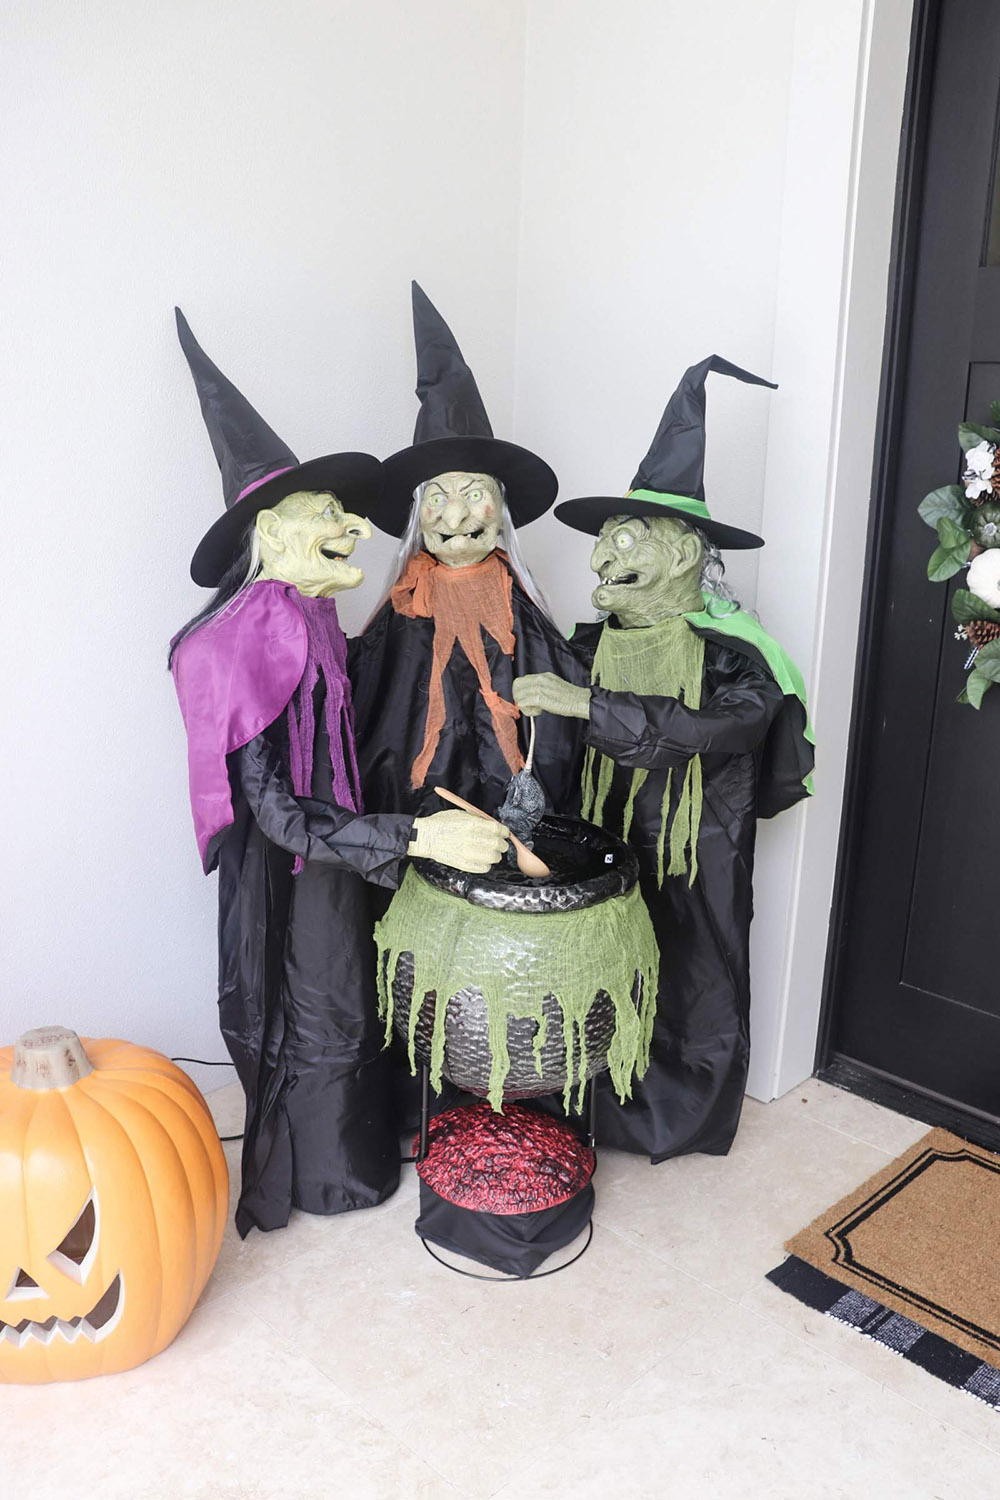 A trio of witches stirring a cauldron on a porch.